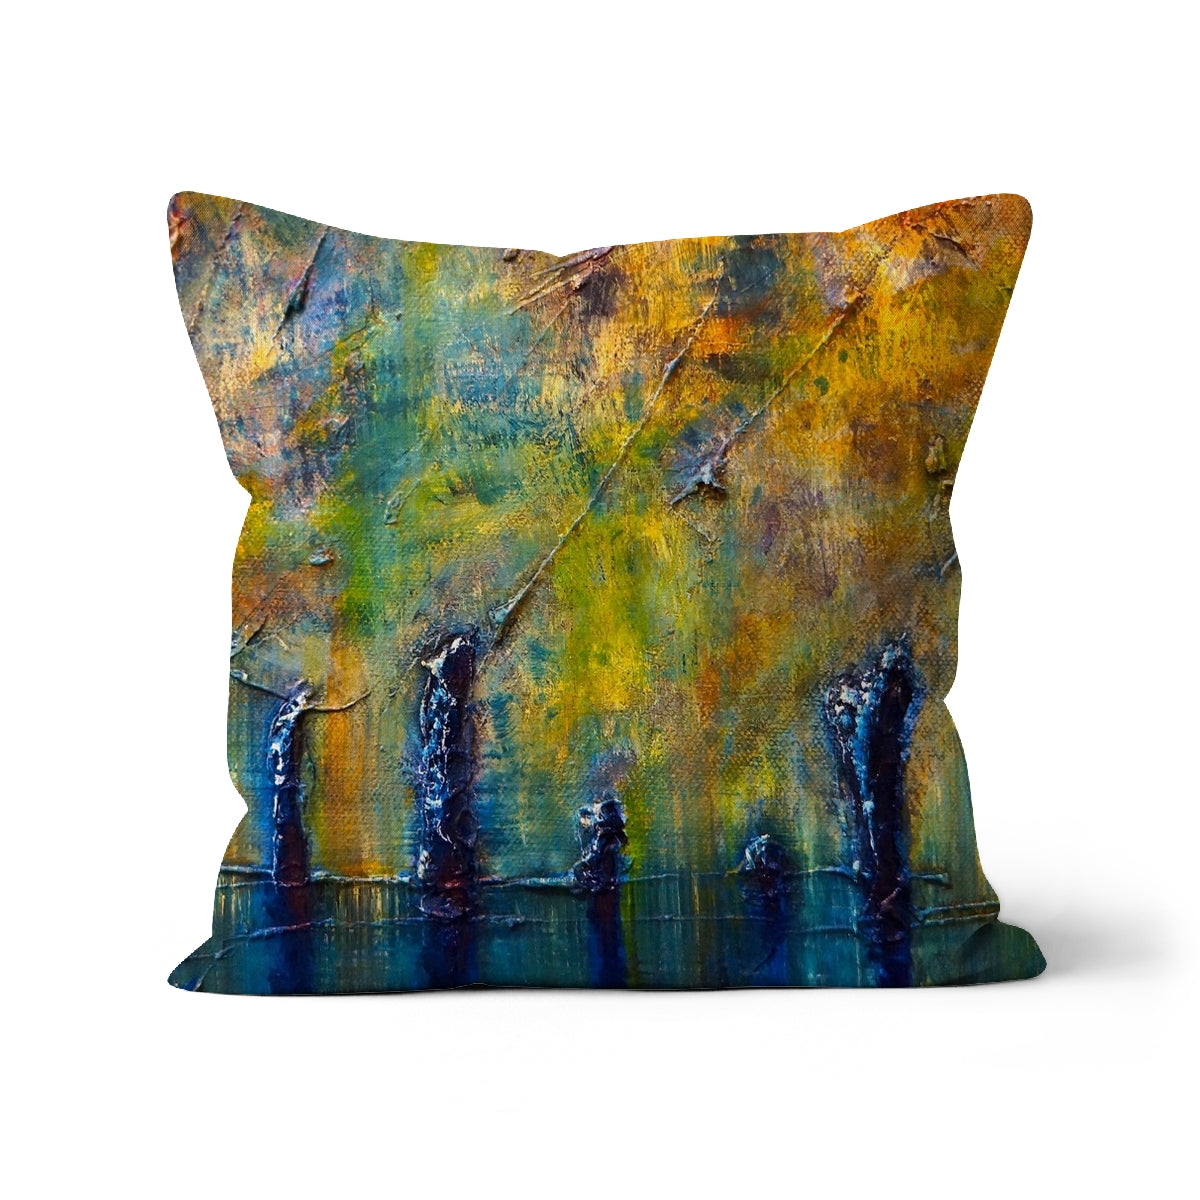 Stenness Moonlight Orkney Art Gifts Cushion-Cushions-Orkney Art Gallery-Linen-12"x12"-Paintings, Prints, Homeware, Art Gifts From Scotland By Scottish Artist Kevin Hunter